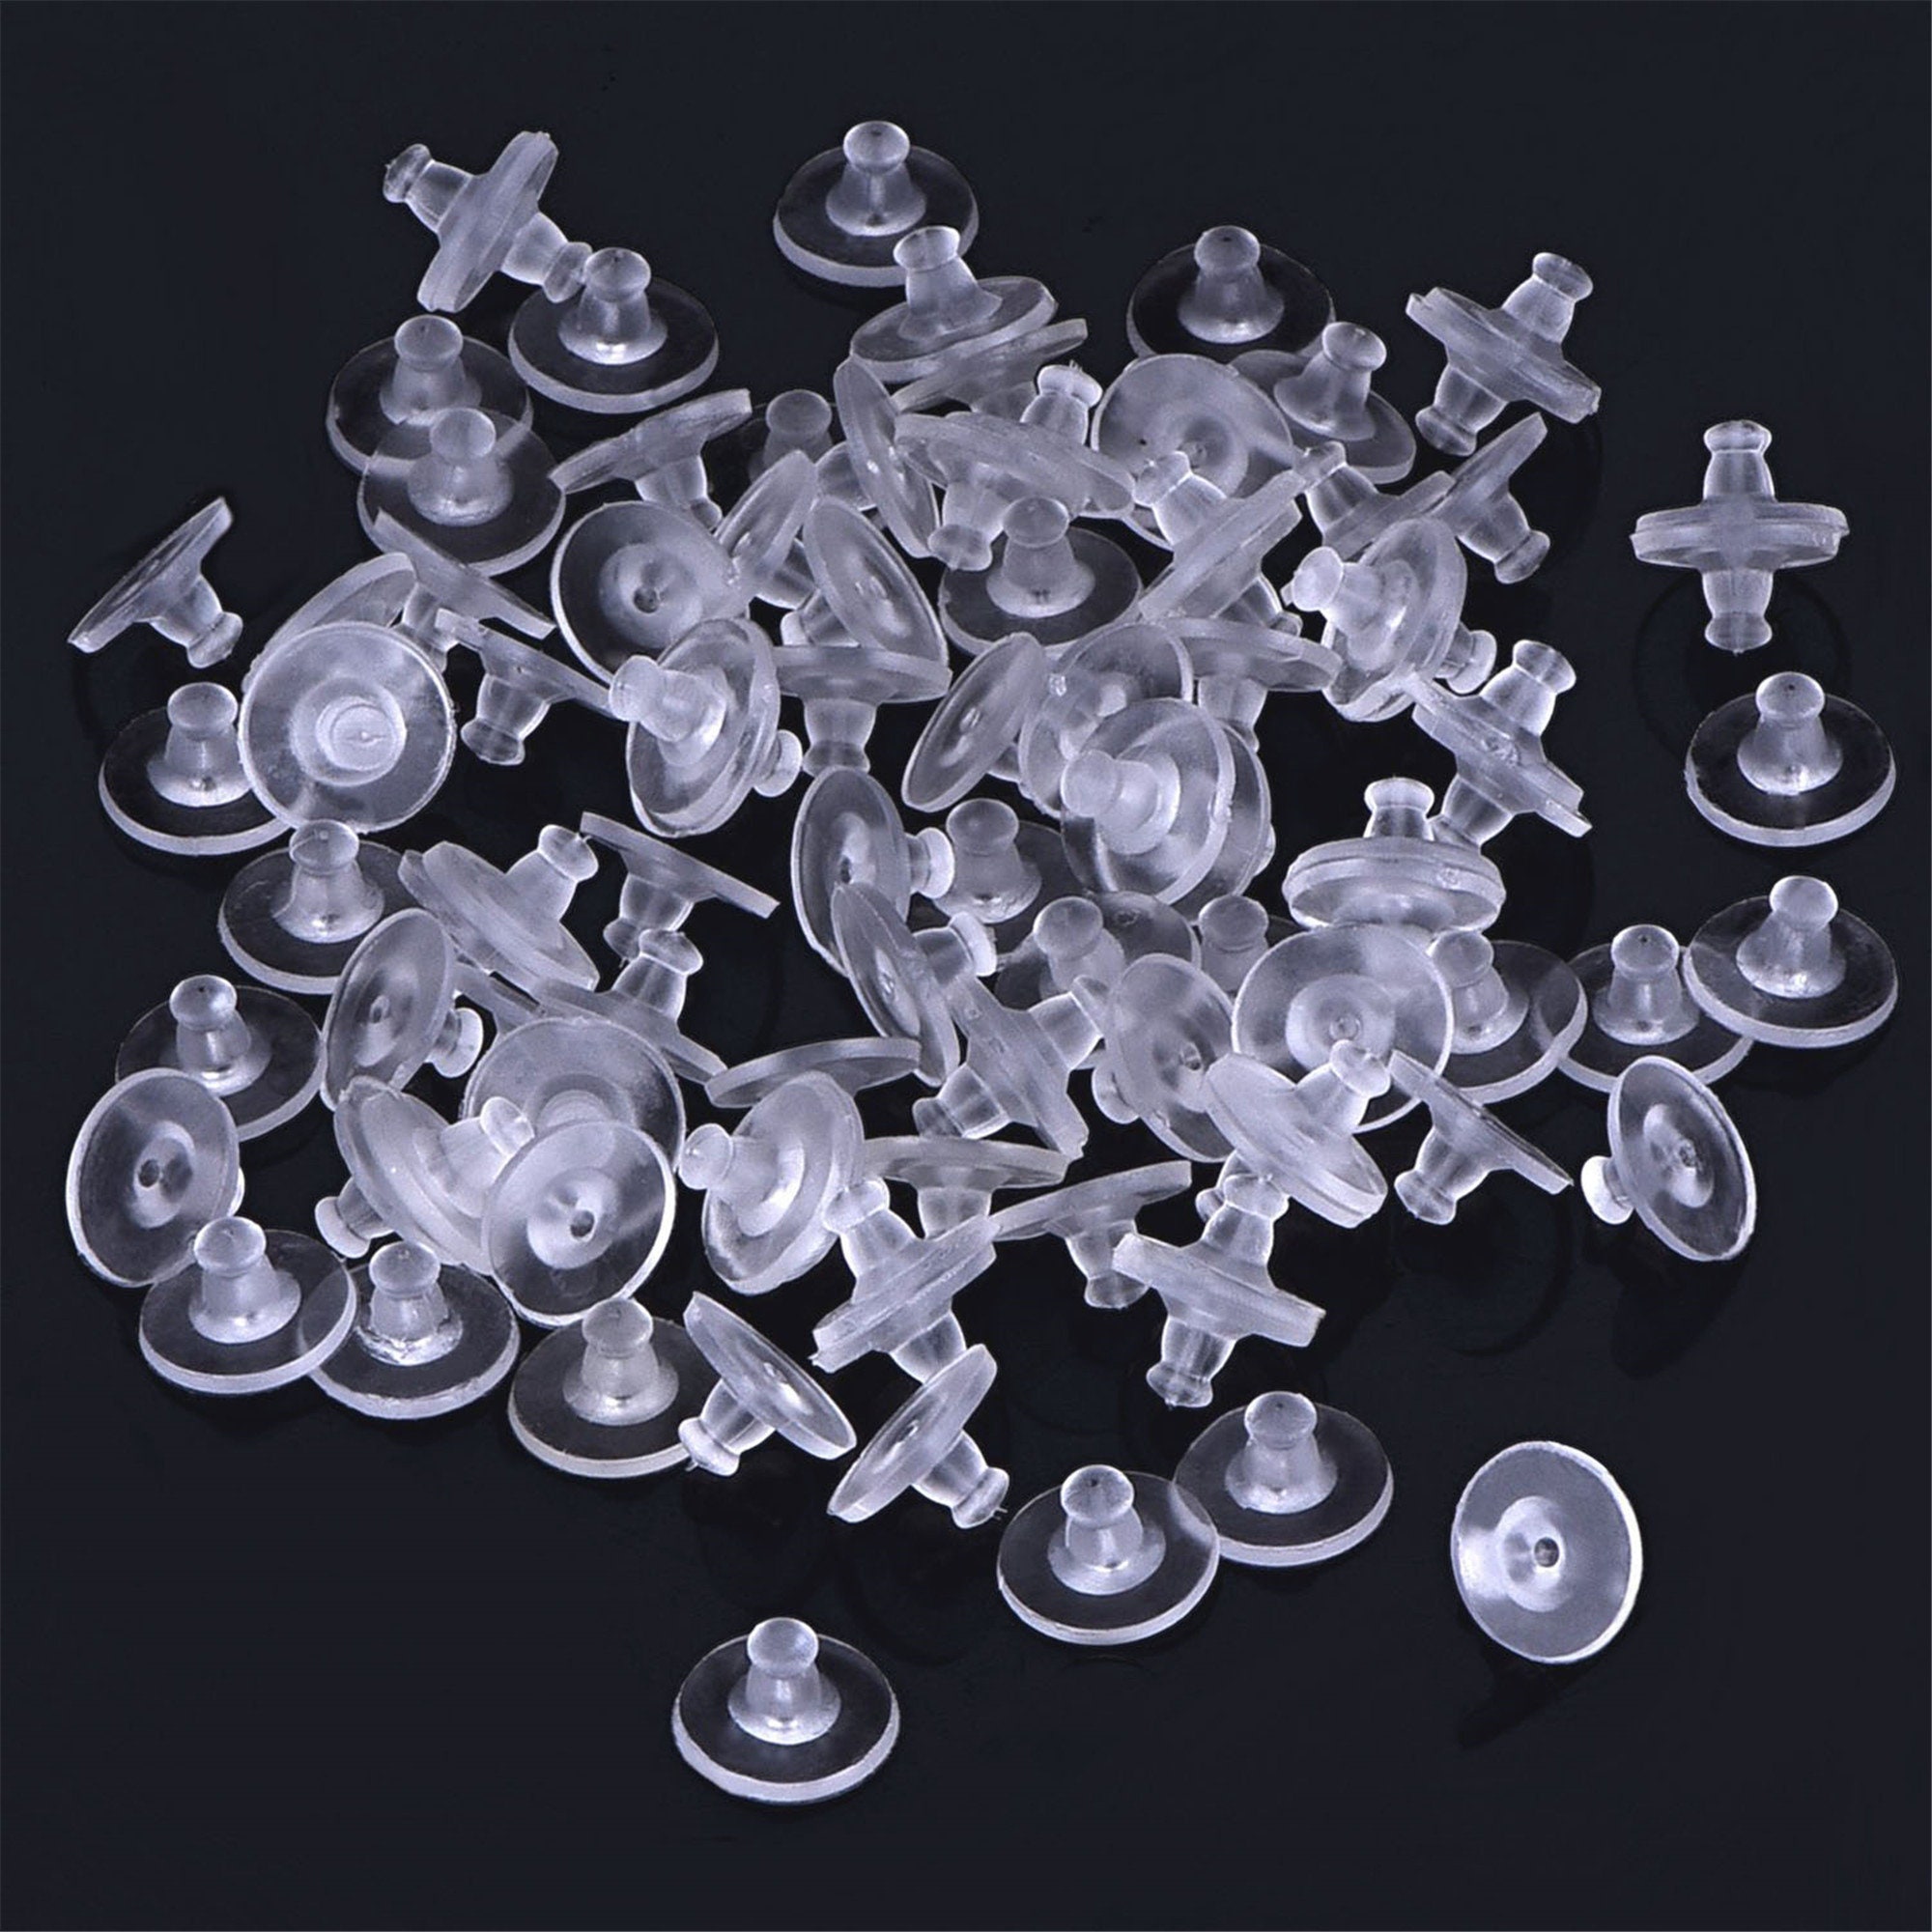 Lot Soft Silicone Rubber Earring Back Stoppers For Stud Earrings